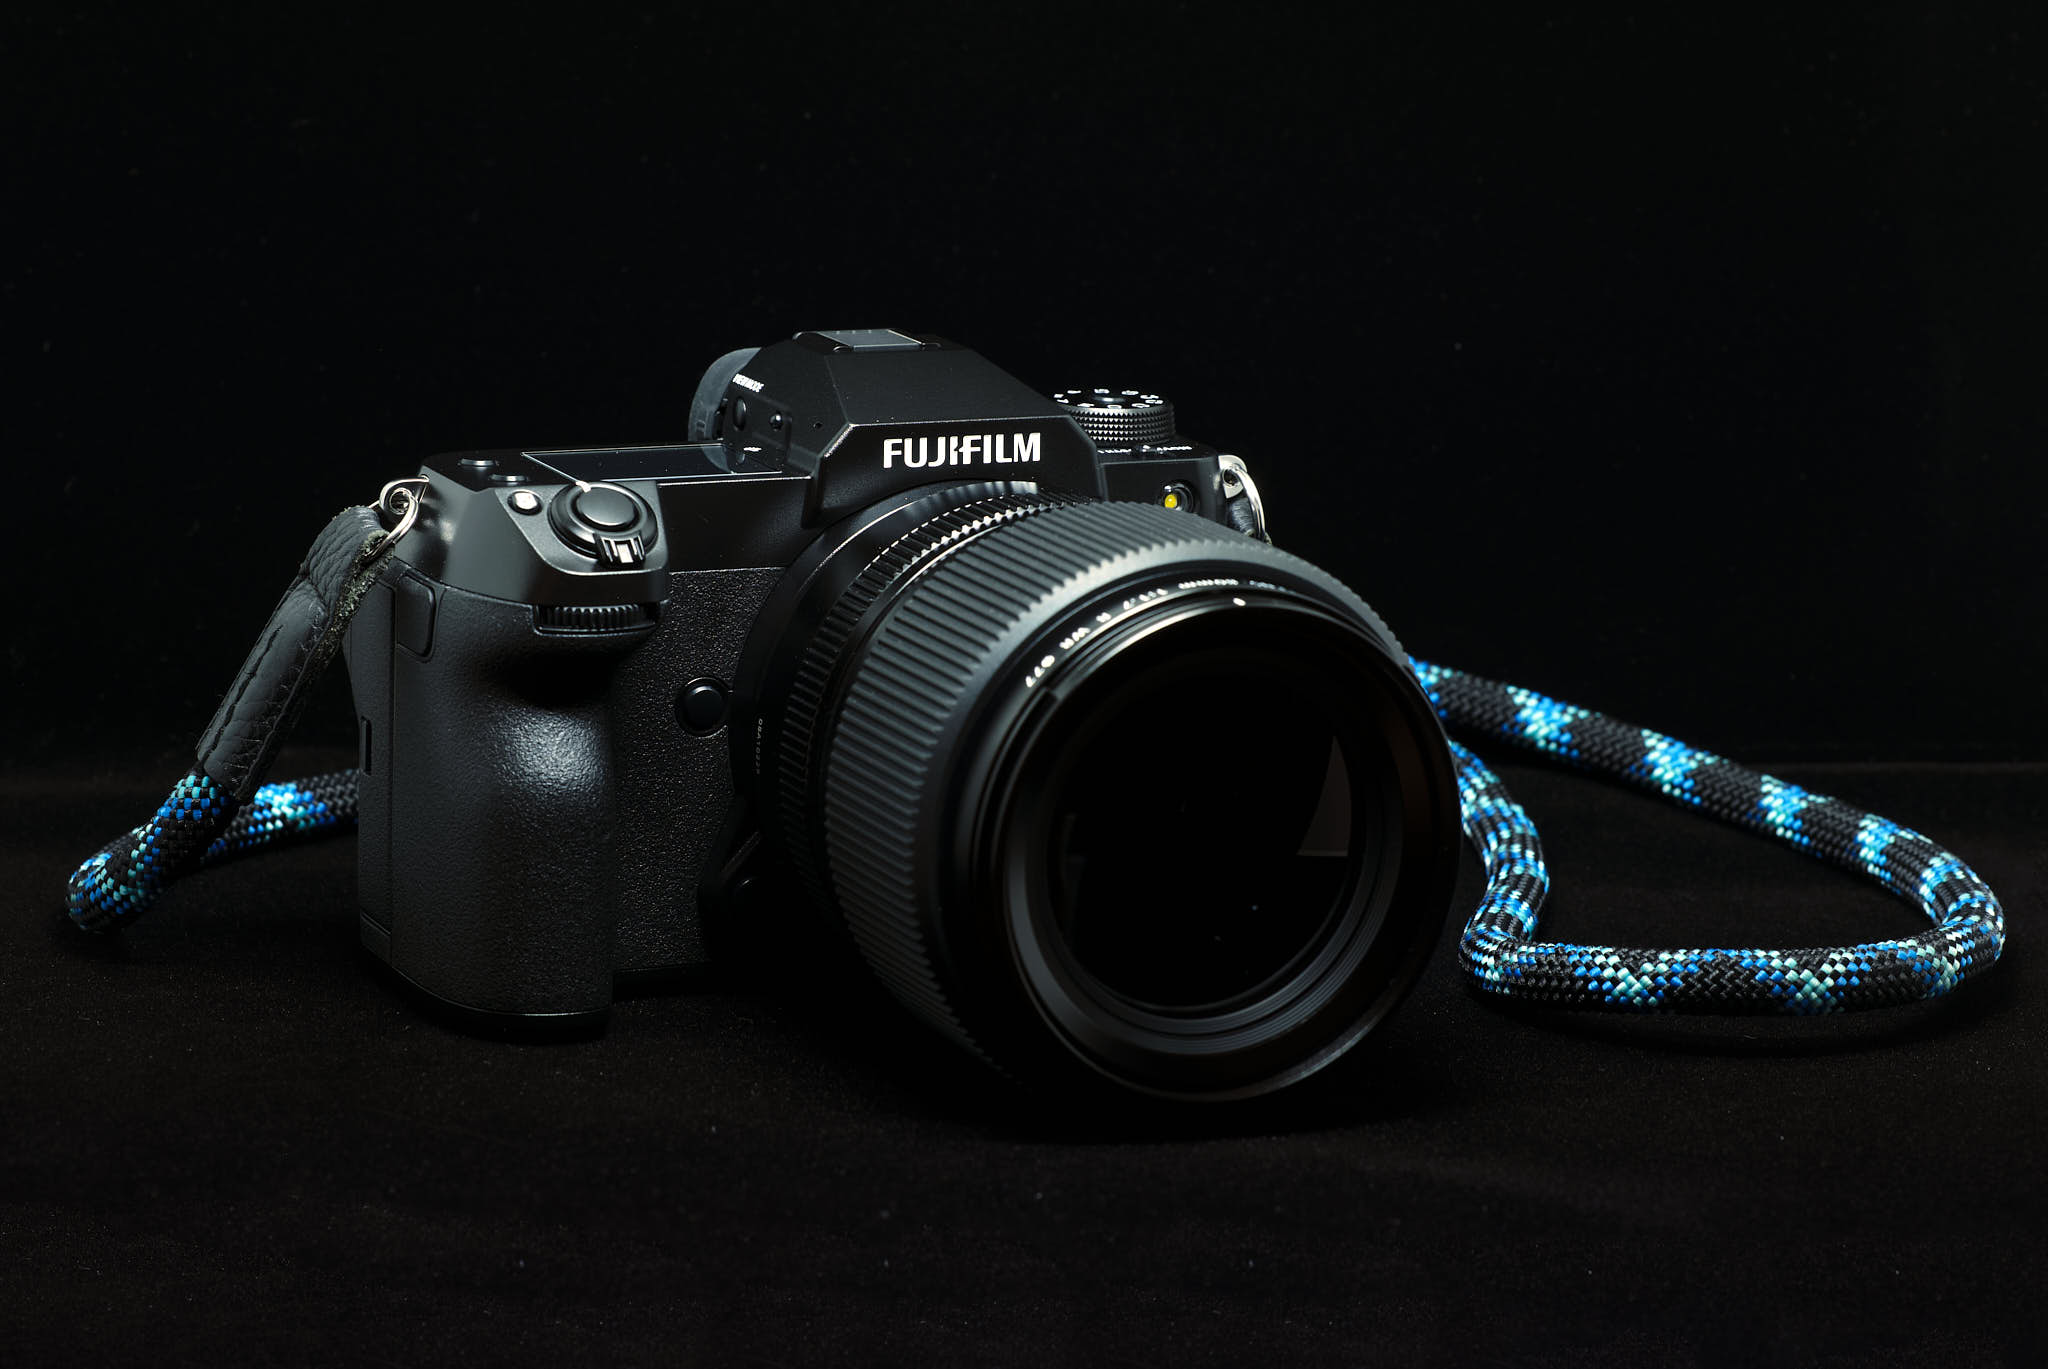 Front quarter view of Fujifilm GFX100S and GF80MM